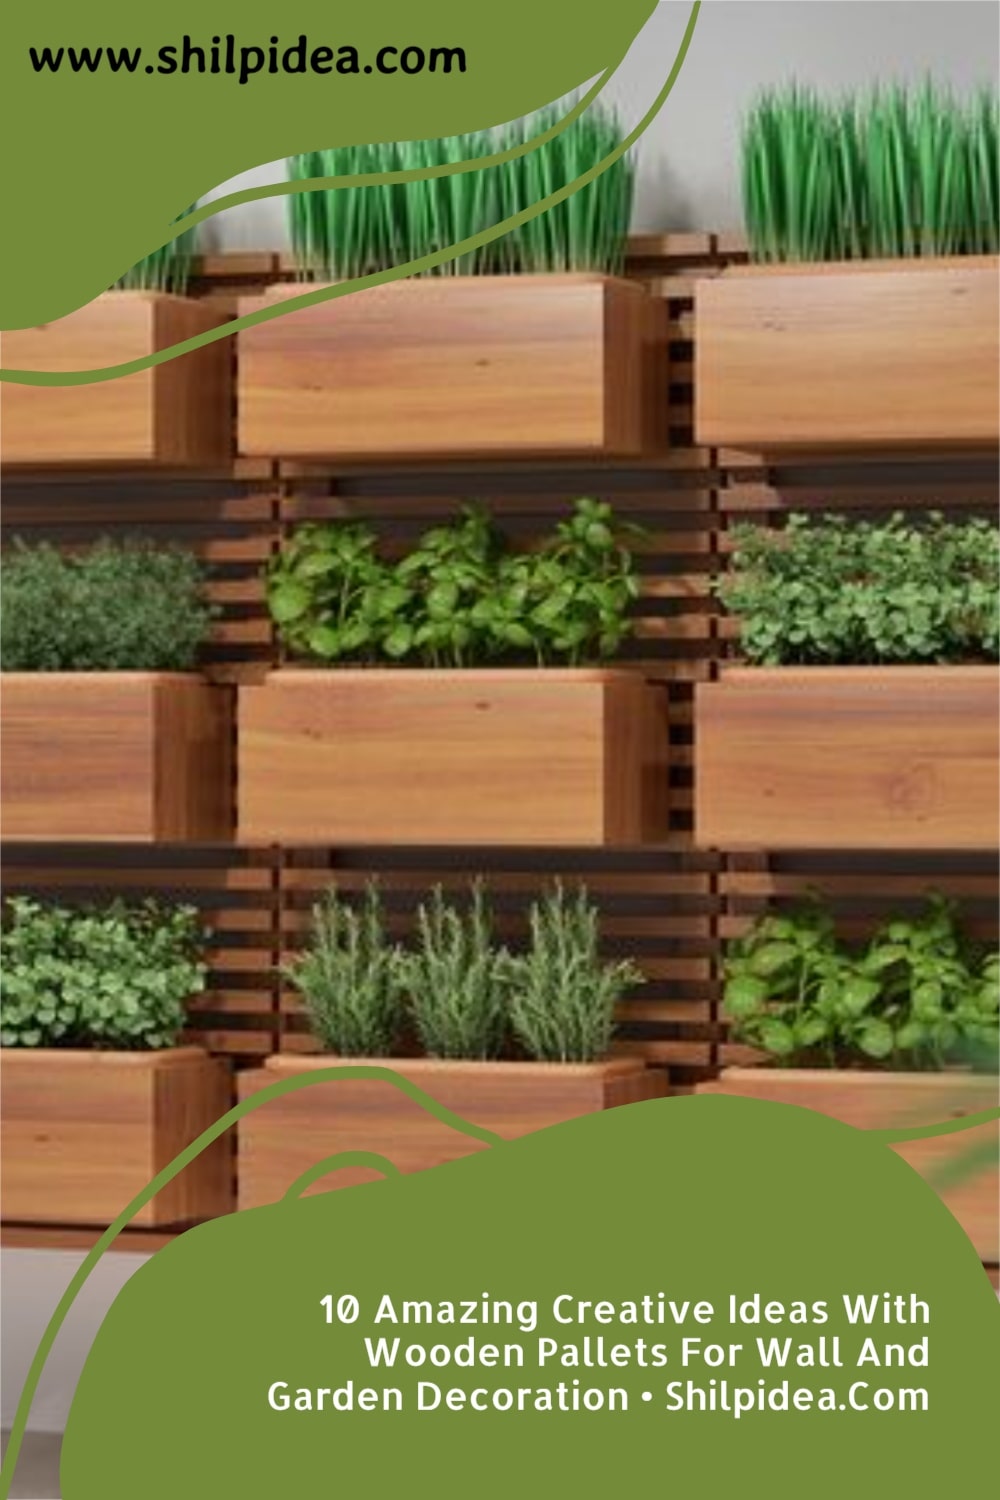 wooden-pallets-for-wall-and-garden-shilpidea